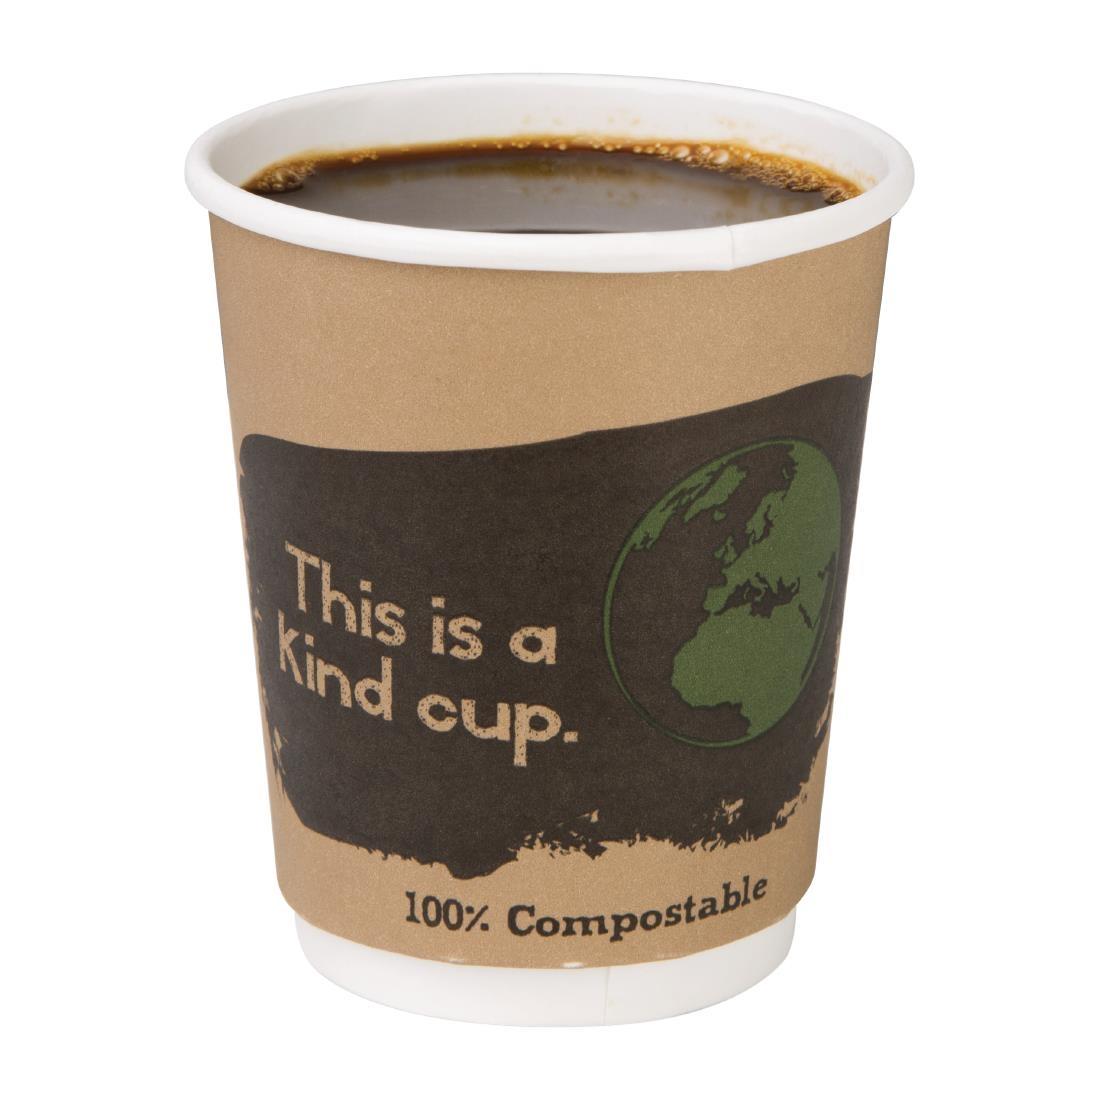 Fiesta Compostable Coffee Cups Double Wall 227ml / 8oz (Pack of 25) - DY984  - 3